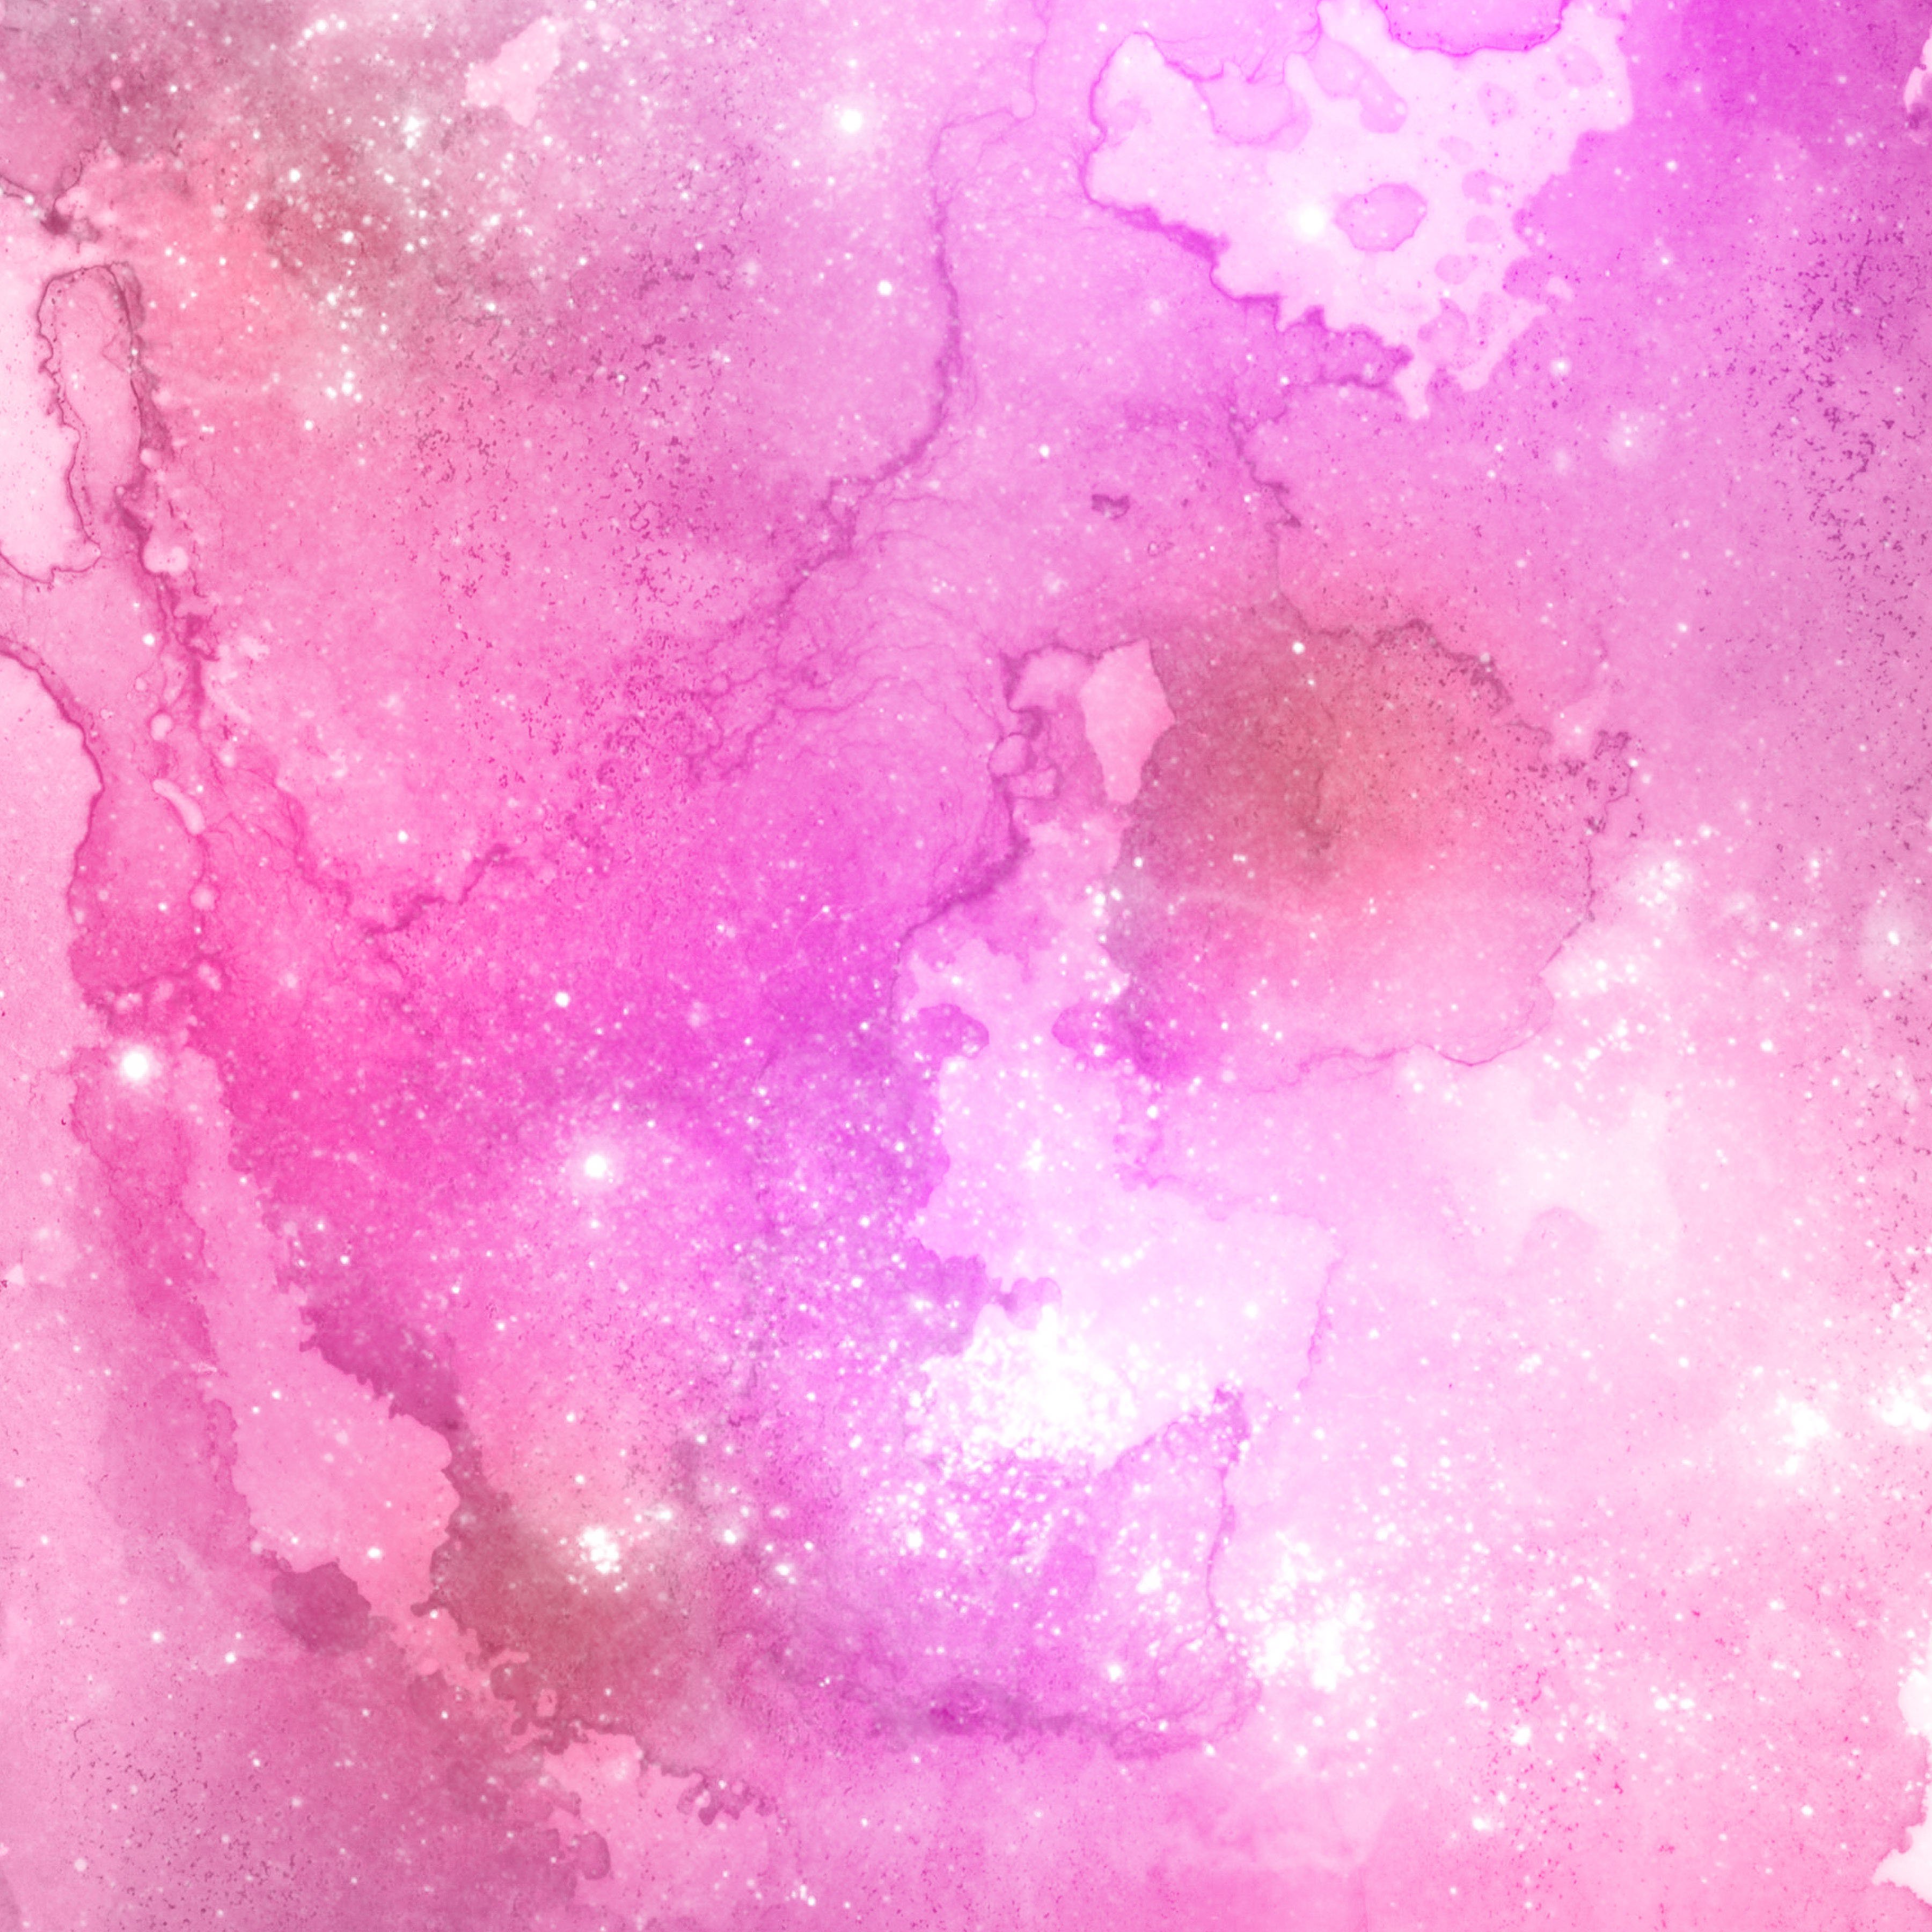 Painted Galaxy Textures